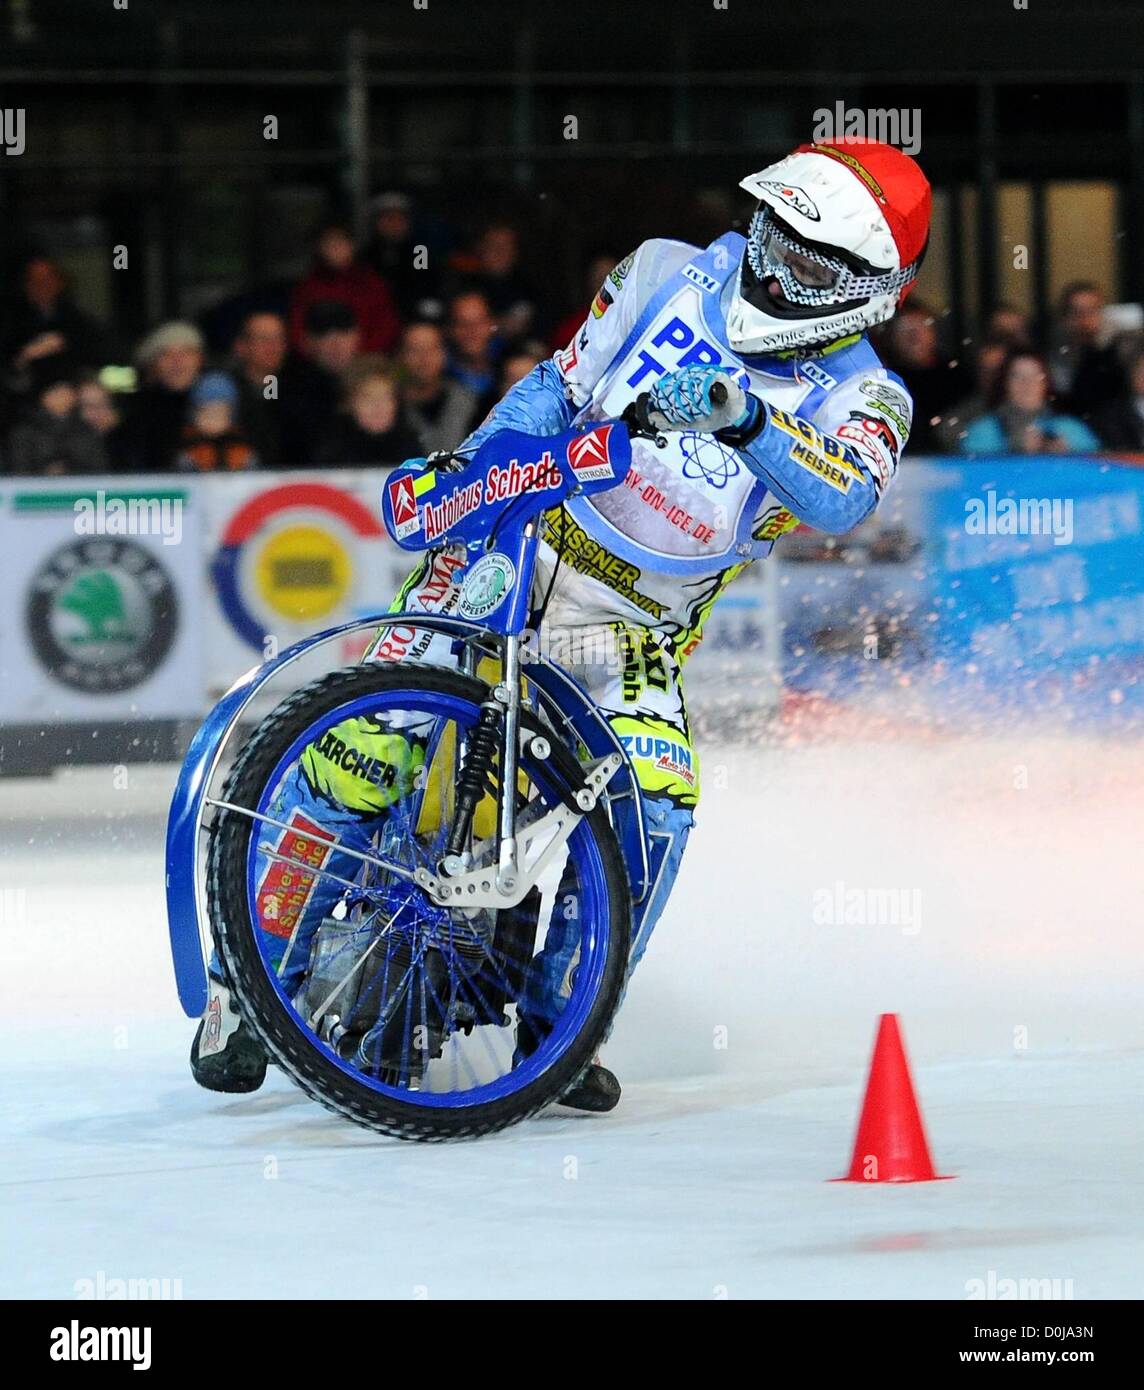 25.11.2012. Freital Speedway, Germany. Ice Speedway competition. Ronny Weis Germany Stock Photo